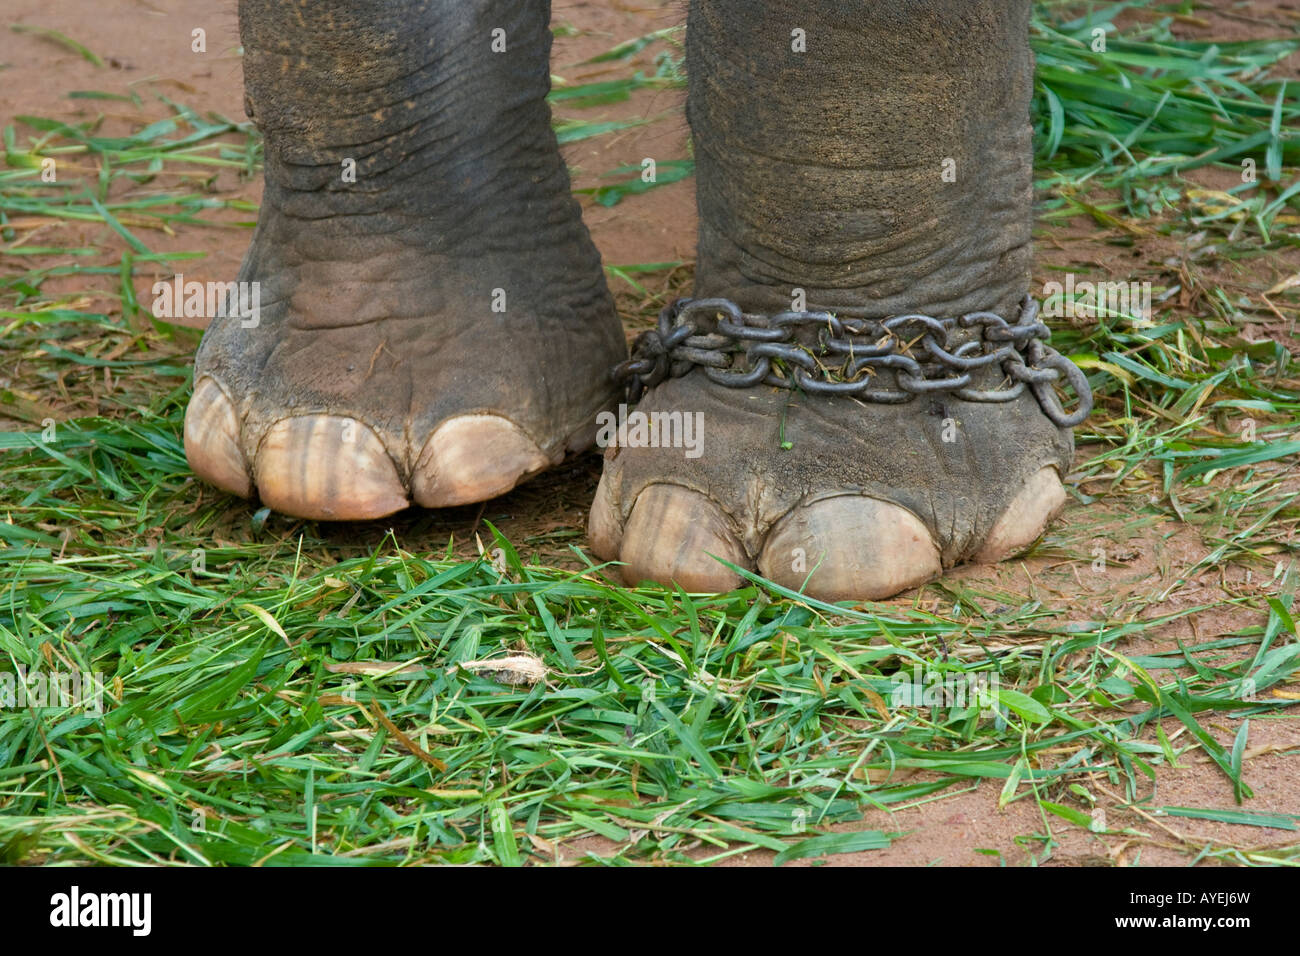 chained feet